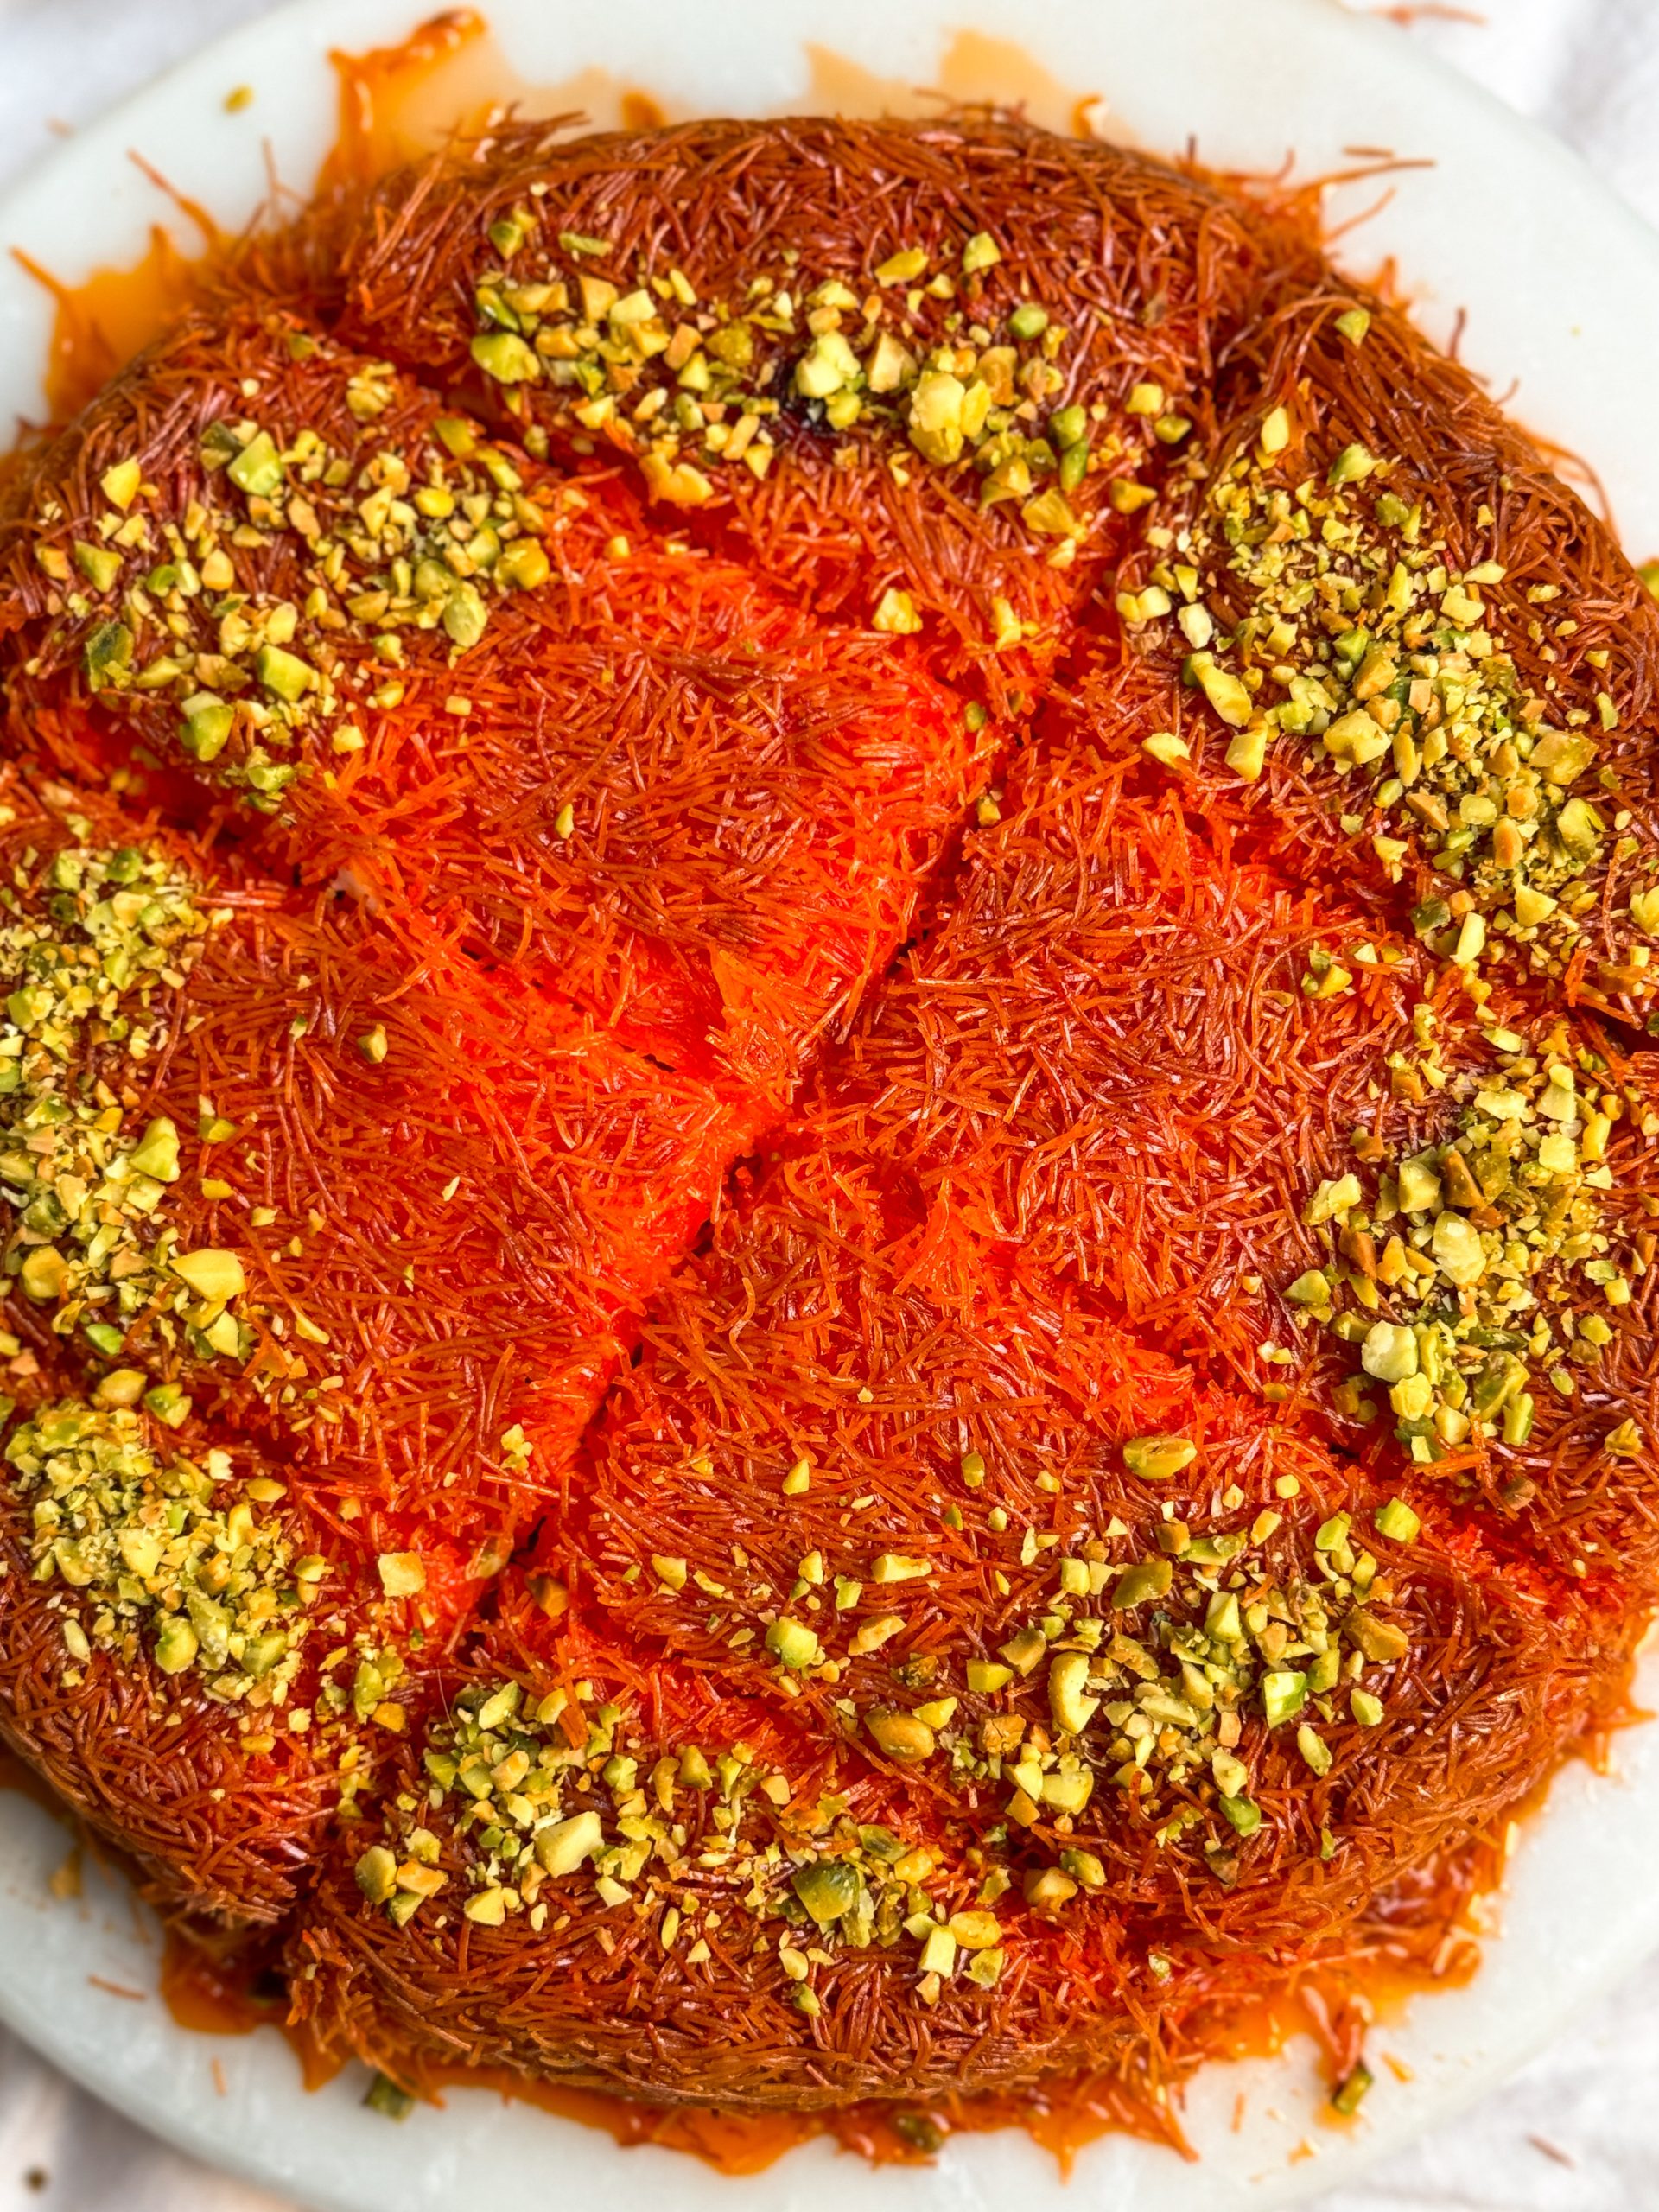 knafeh on a white marble serving board. knafeh has a crispy orange exterior, is soaked in syrup, decorated with chopped pistachios and cut into slices; close up picture